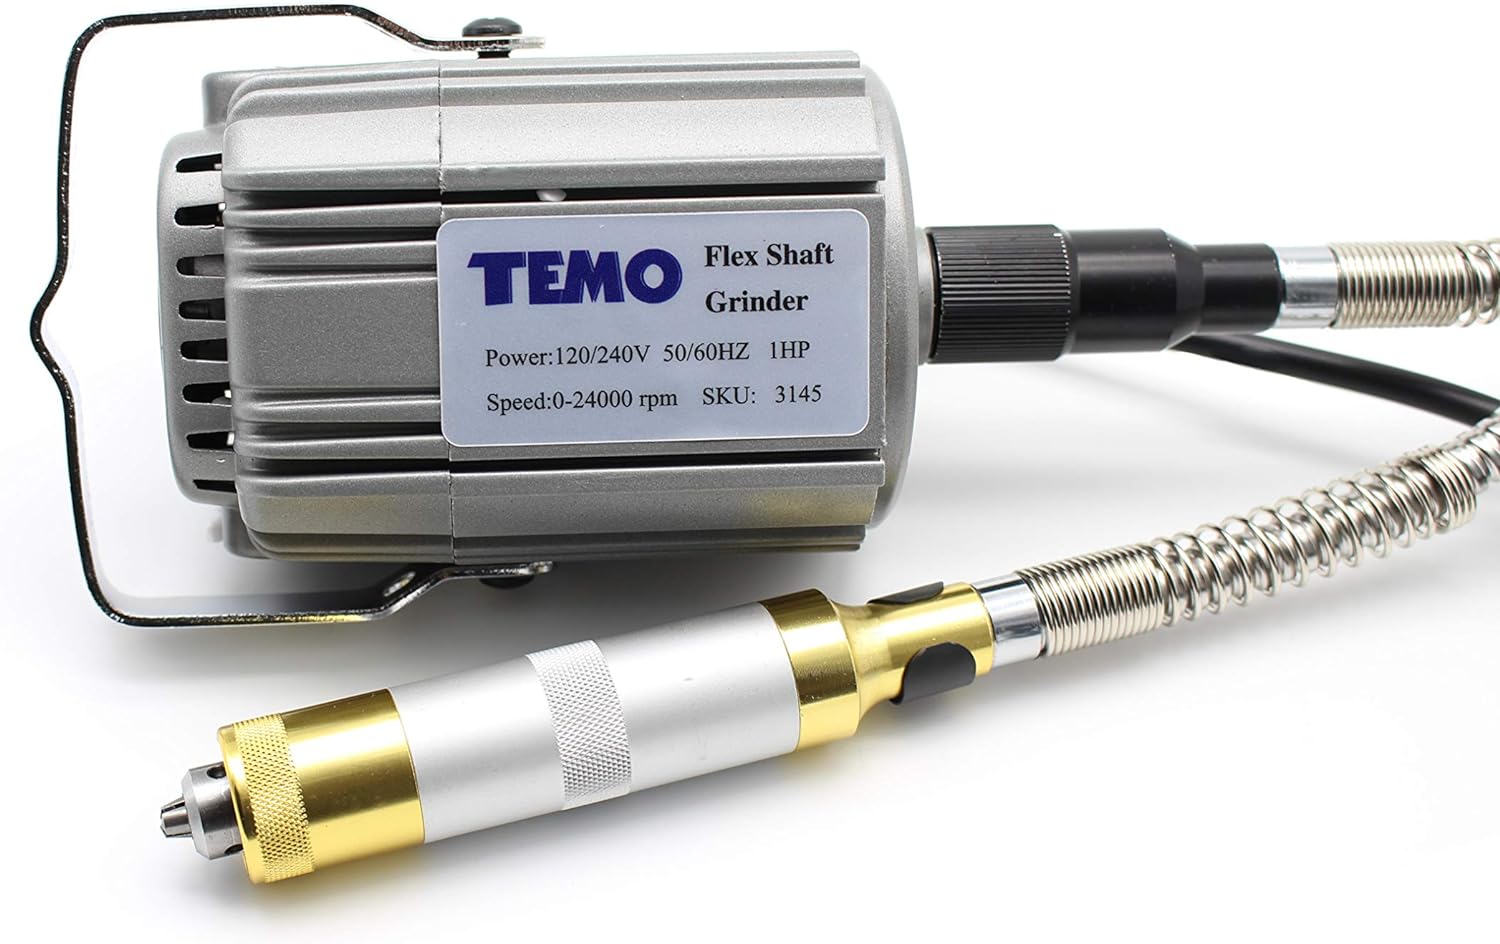 Golden Coulee TEMO Heavy Duty Grinder Polishing Rotary Tool with Foot Pedal and Flexible Shaft